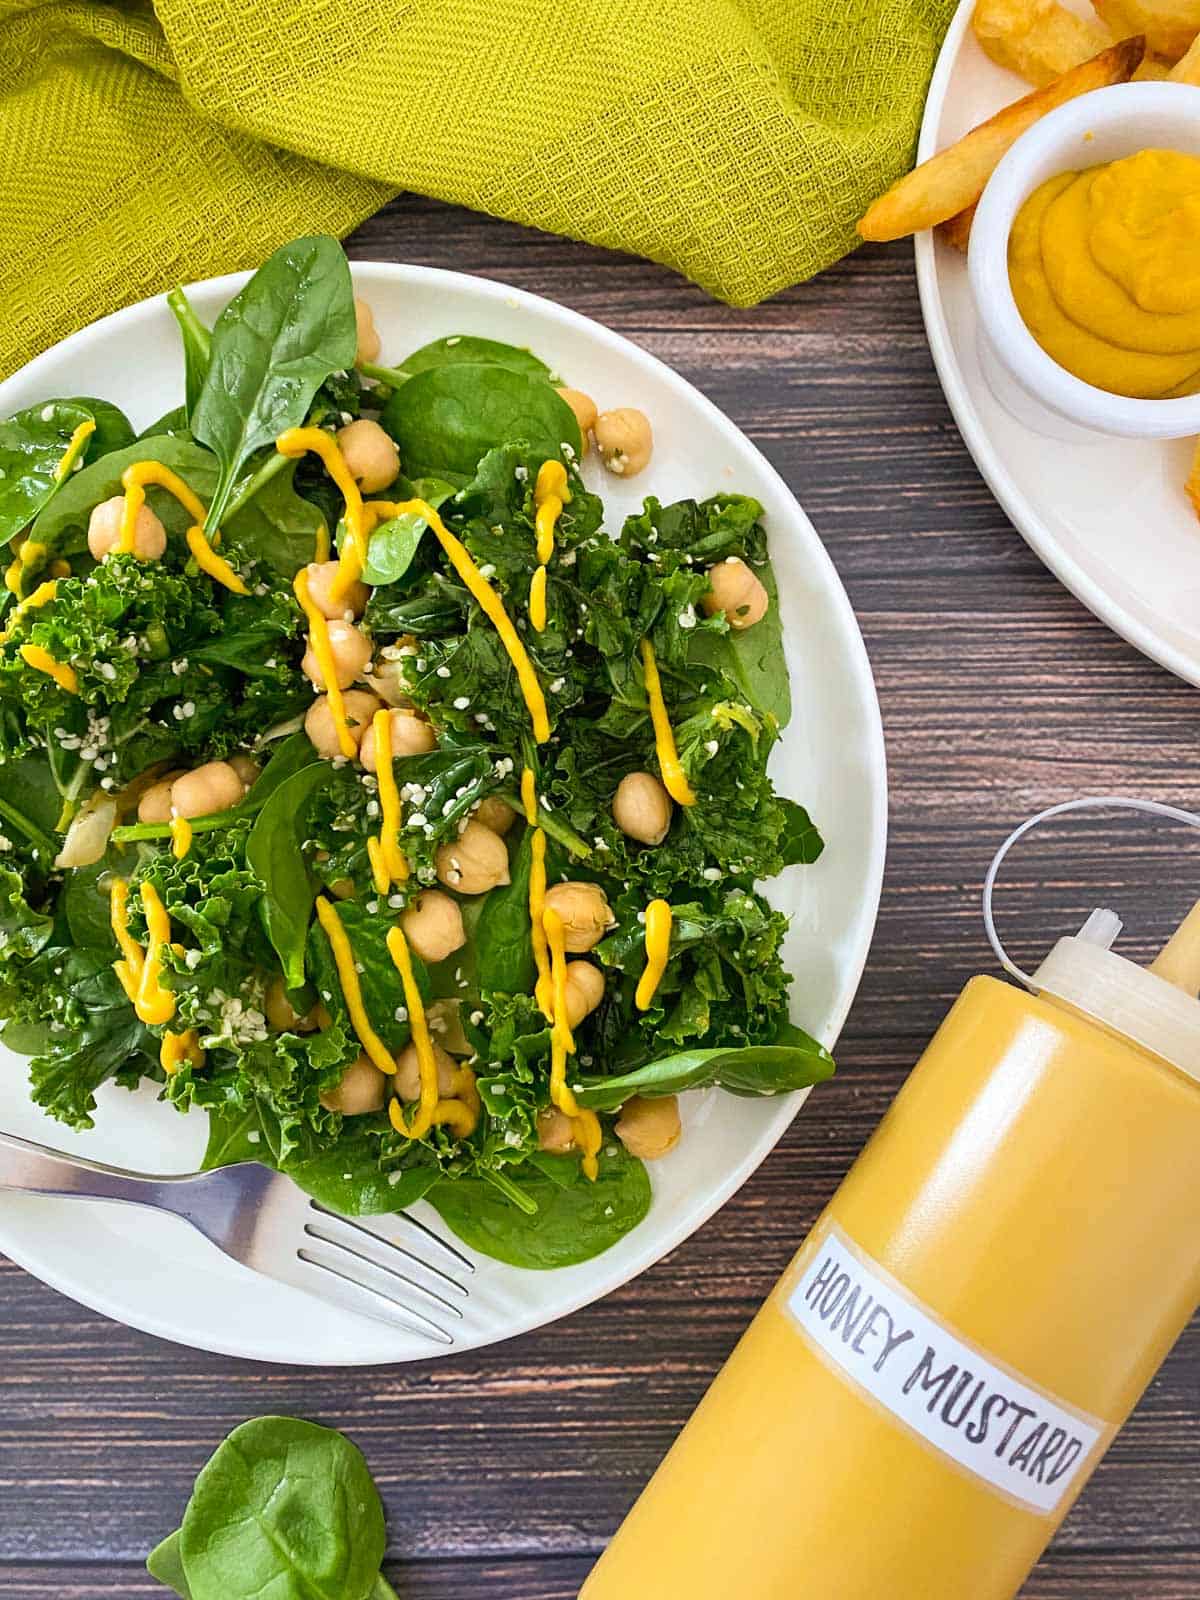 Plate of kale, spinach and chickpea salad with yellow dressing drizzled on top.